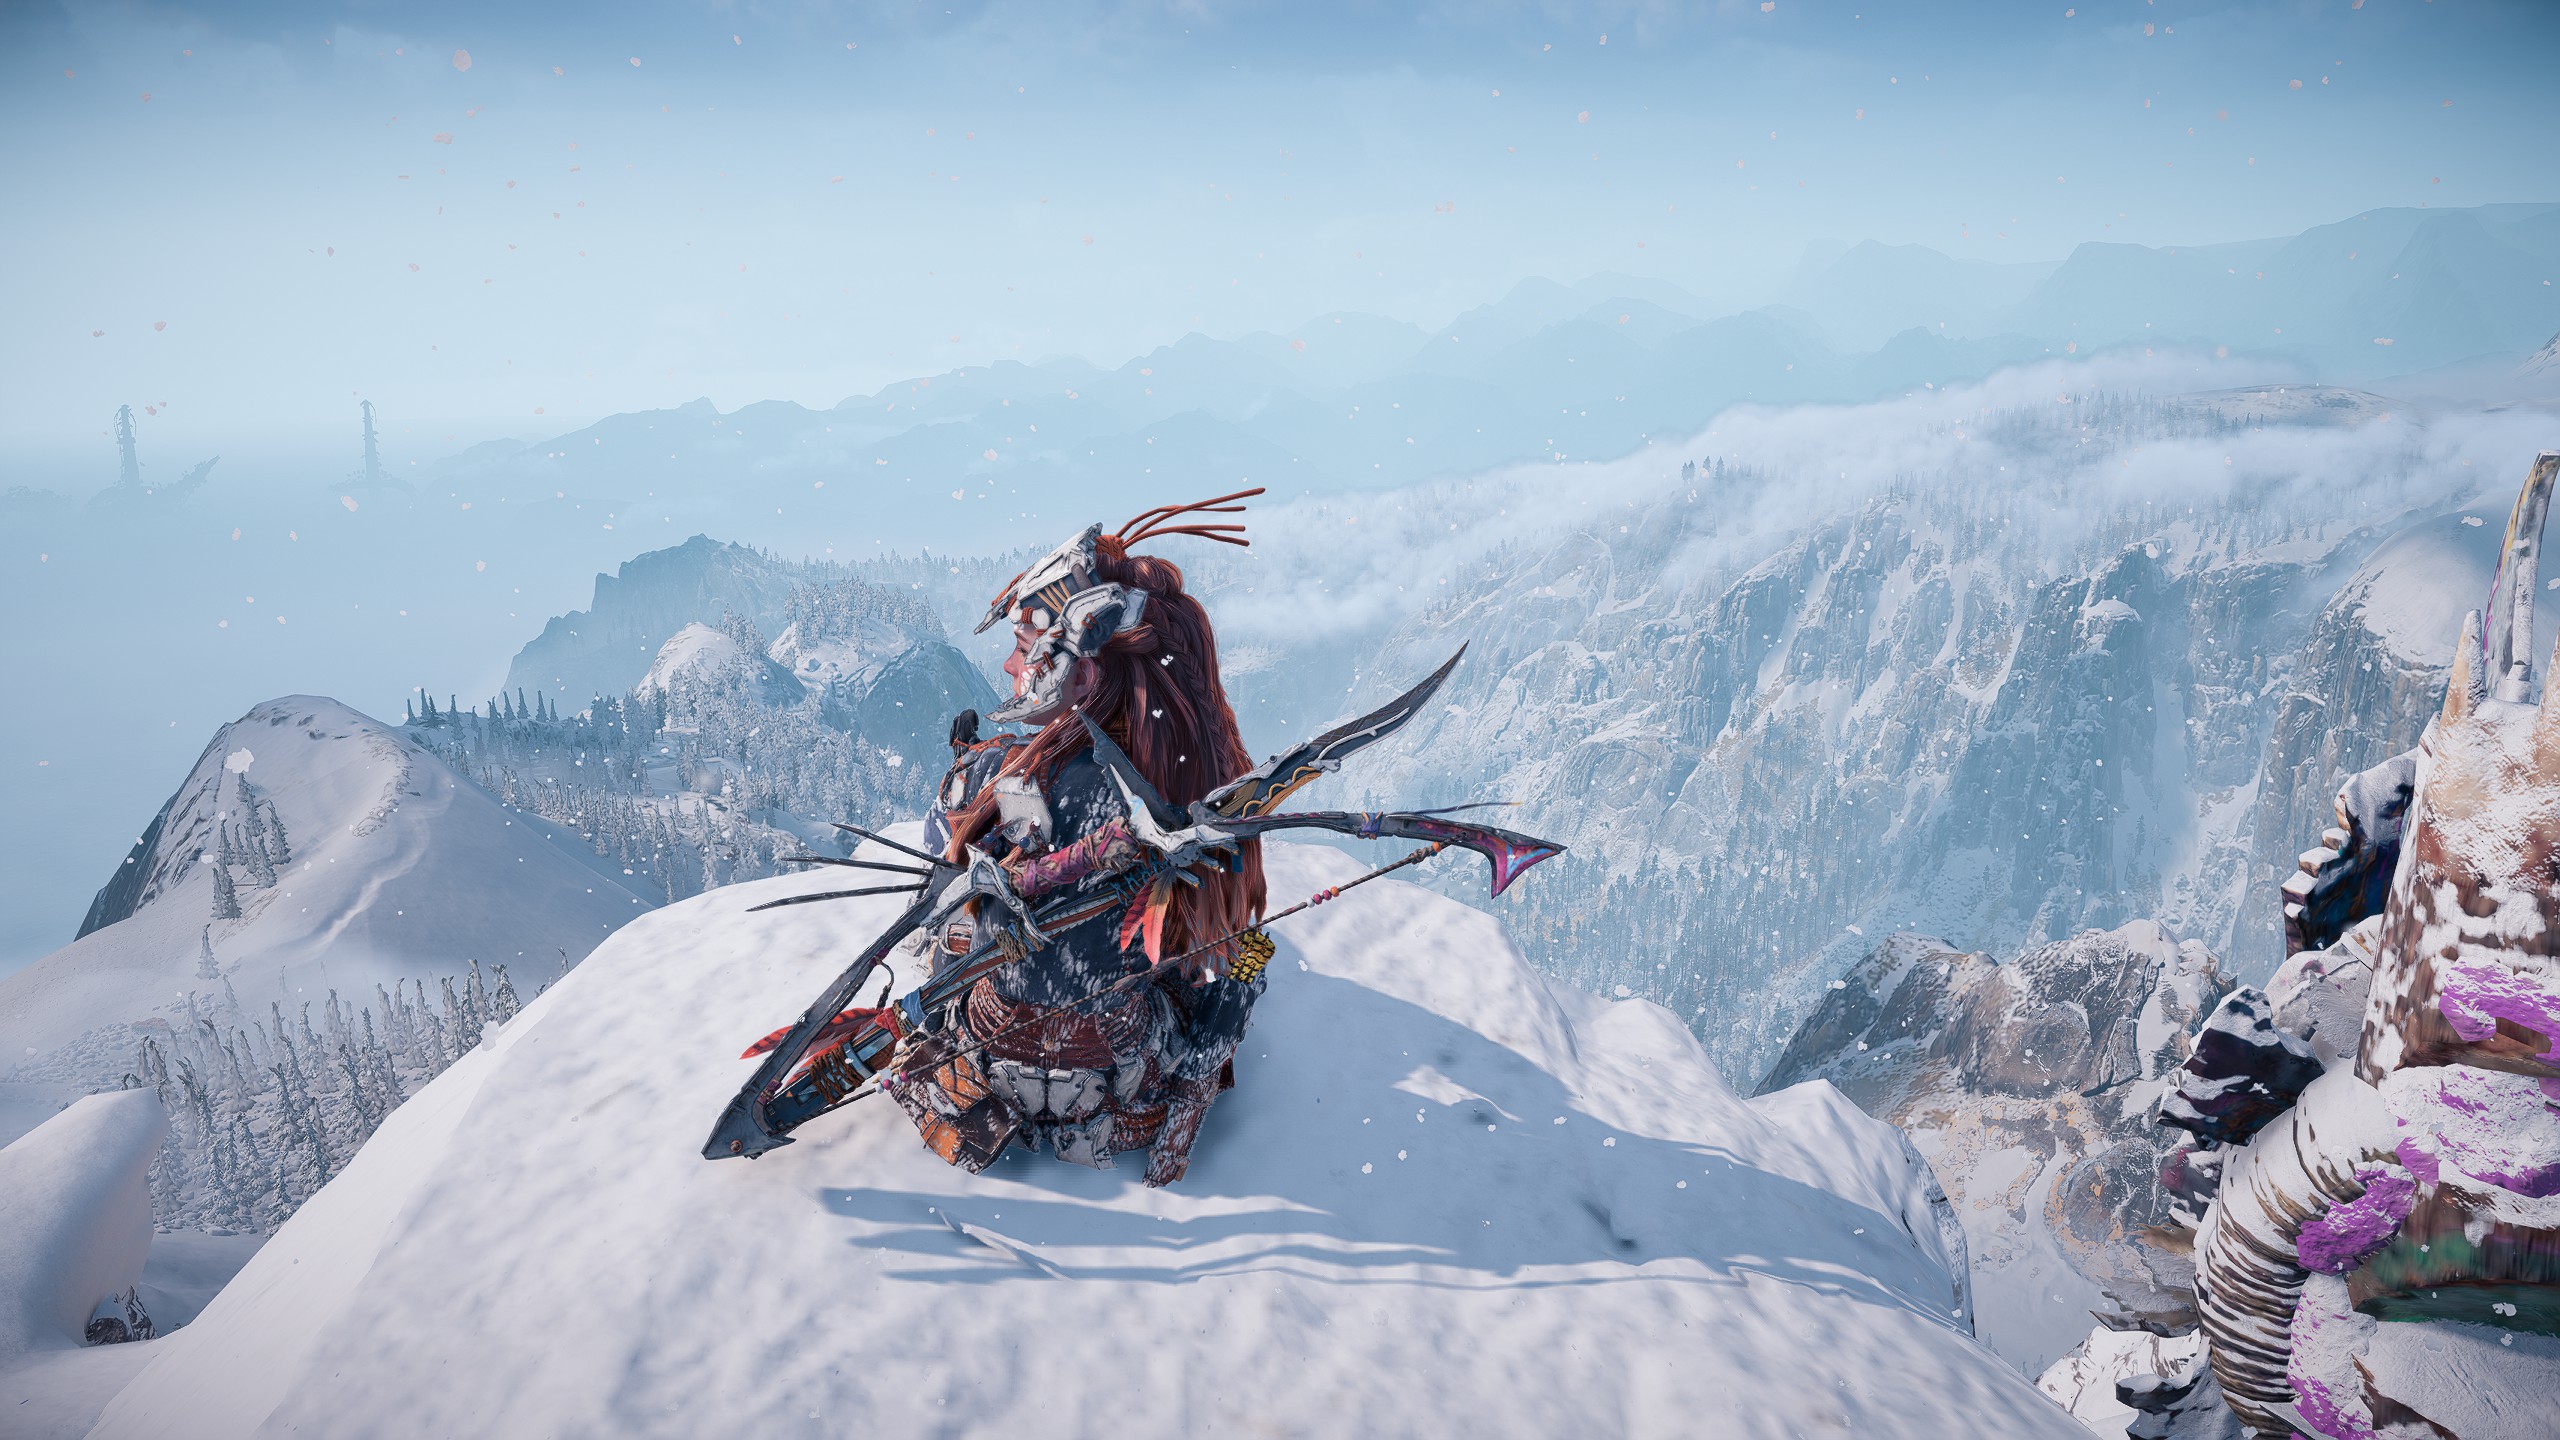 General 2560x1440 Horizon Forbidden West video game characters video game girls Aloy video game art screen shot video games landscape snowy mountain CGI snow trees bow long hair brunette looking away mountains looking sideways sky